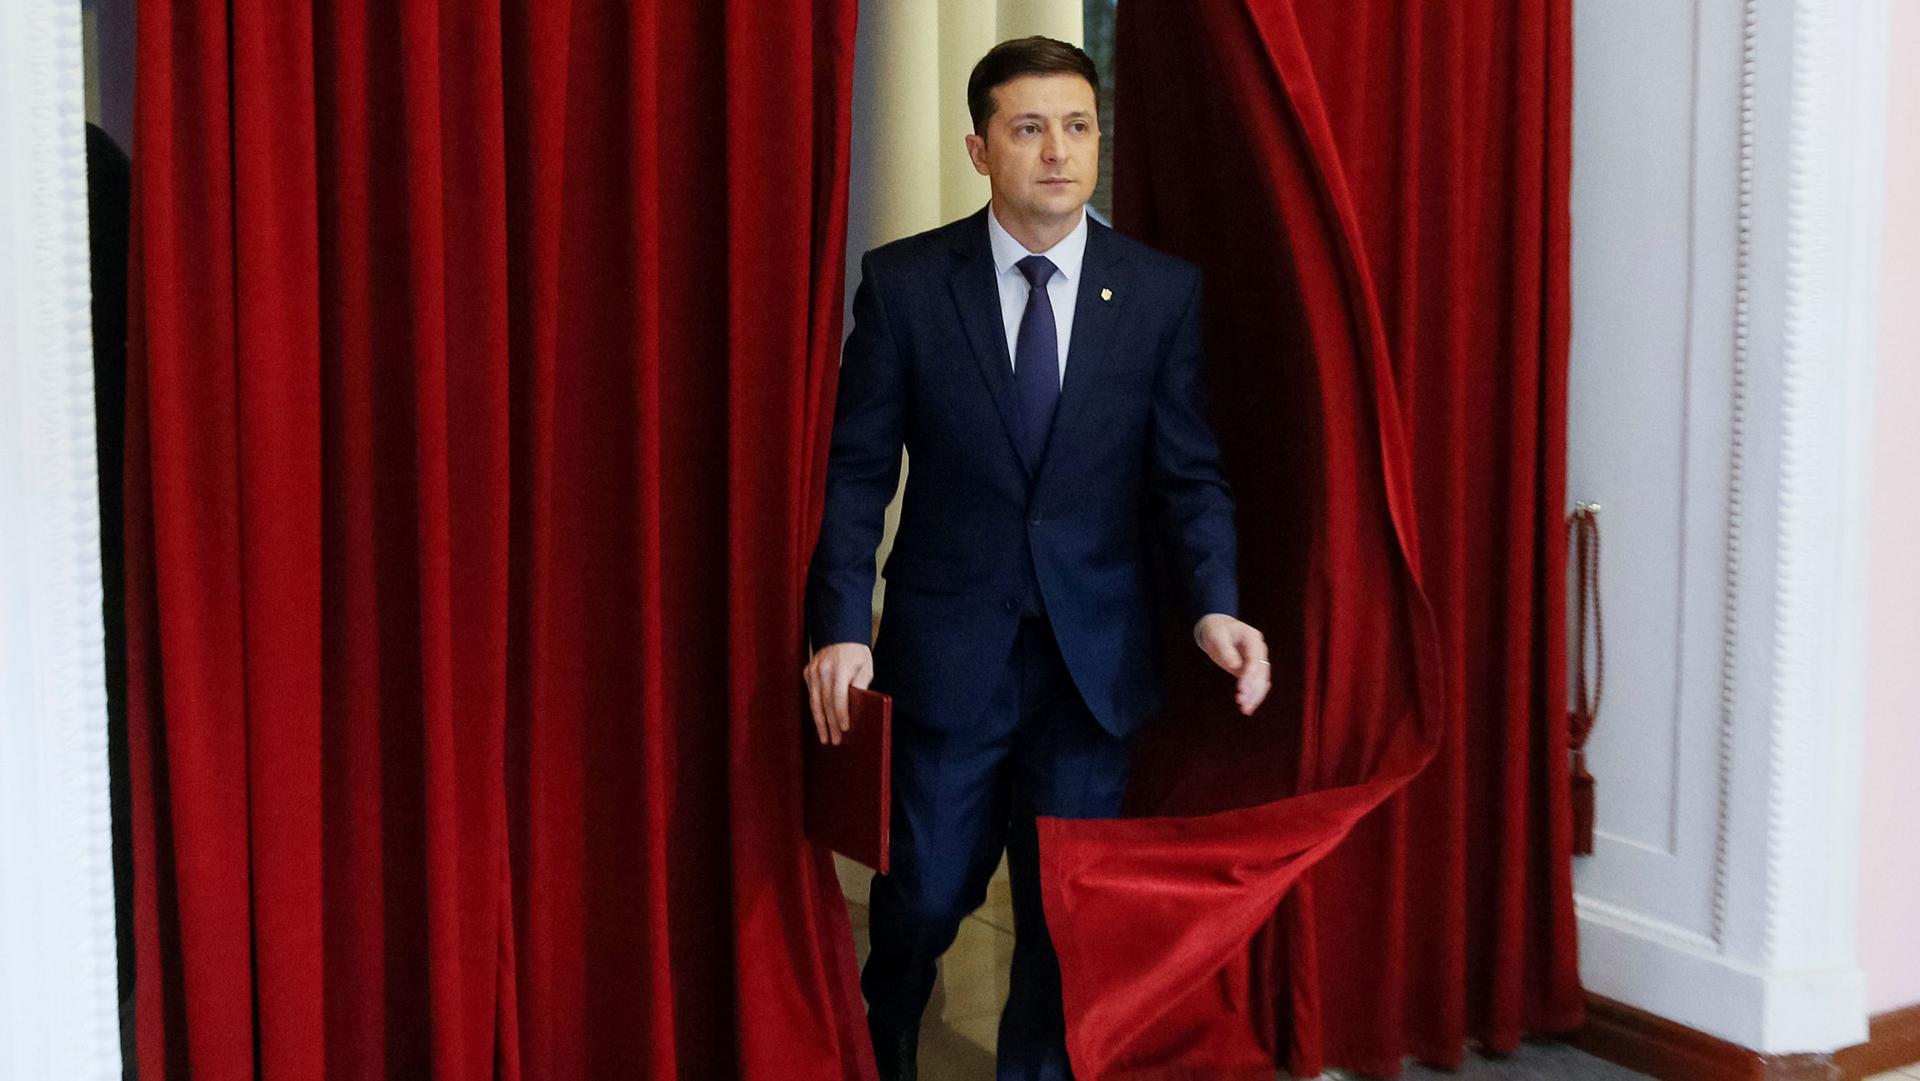 Actor Volodymyr Zelenskiy is shown in a blue suit walking out from parting red curtains.